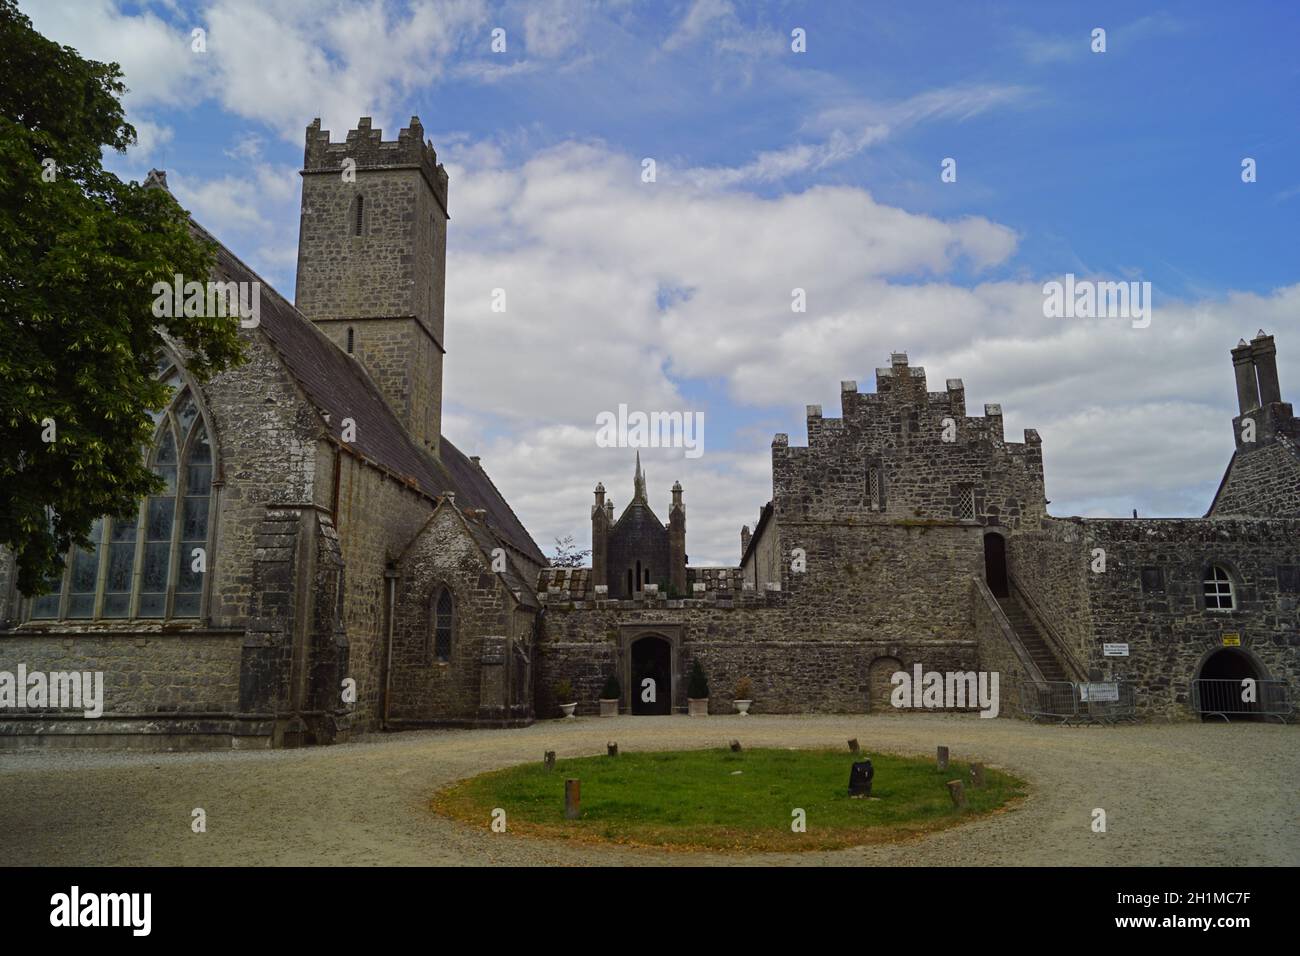 The Adare Friary, located in Adare, County Limerick, Ireland, formerly known as the 'Black Abbey', is an Augustinian Friary founded in 1316 by the Ear Stock Photo